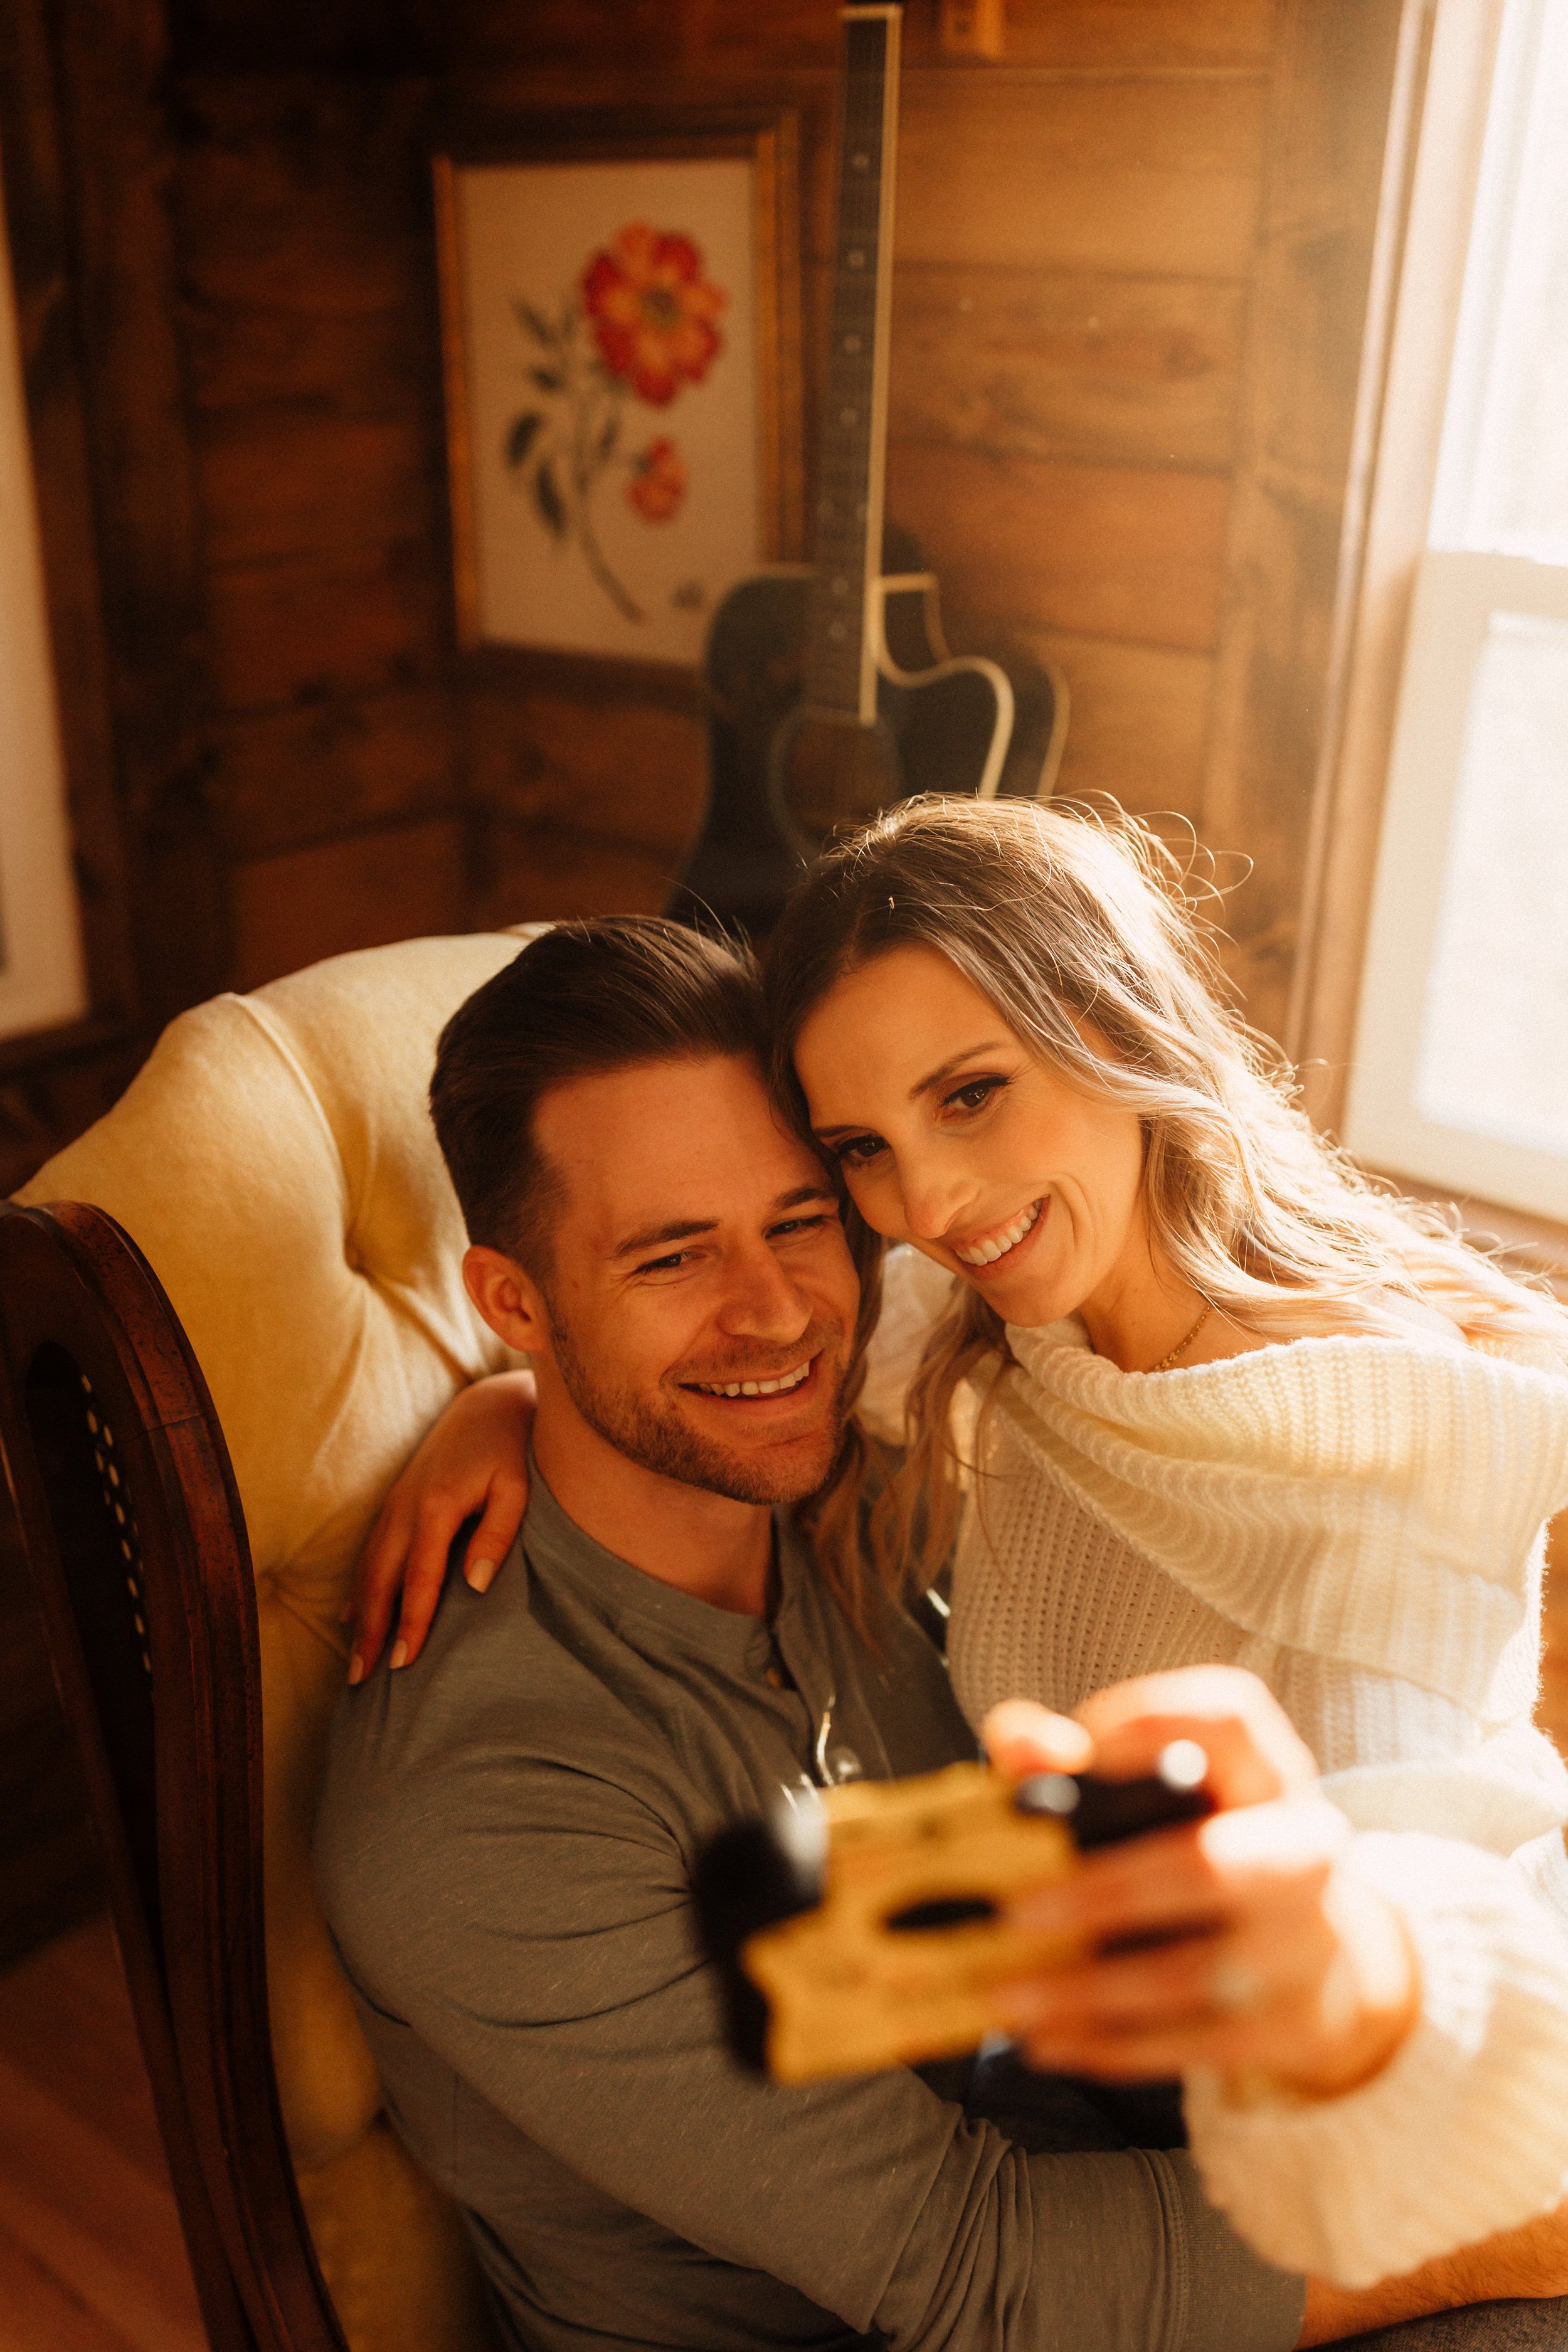 Laura_Ben_Engagment_Session_Winterset_Des_moines_Iowa_Couples_Photographer_Iris_Aisle_Cabin_Conservatory_Candid_Snow_Day_Winter_KMP_Photography-0478.jpg